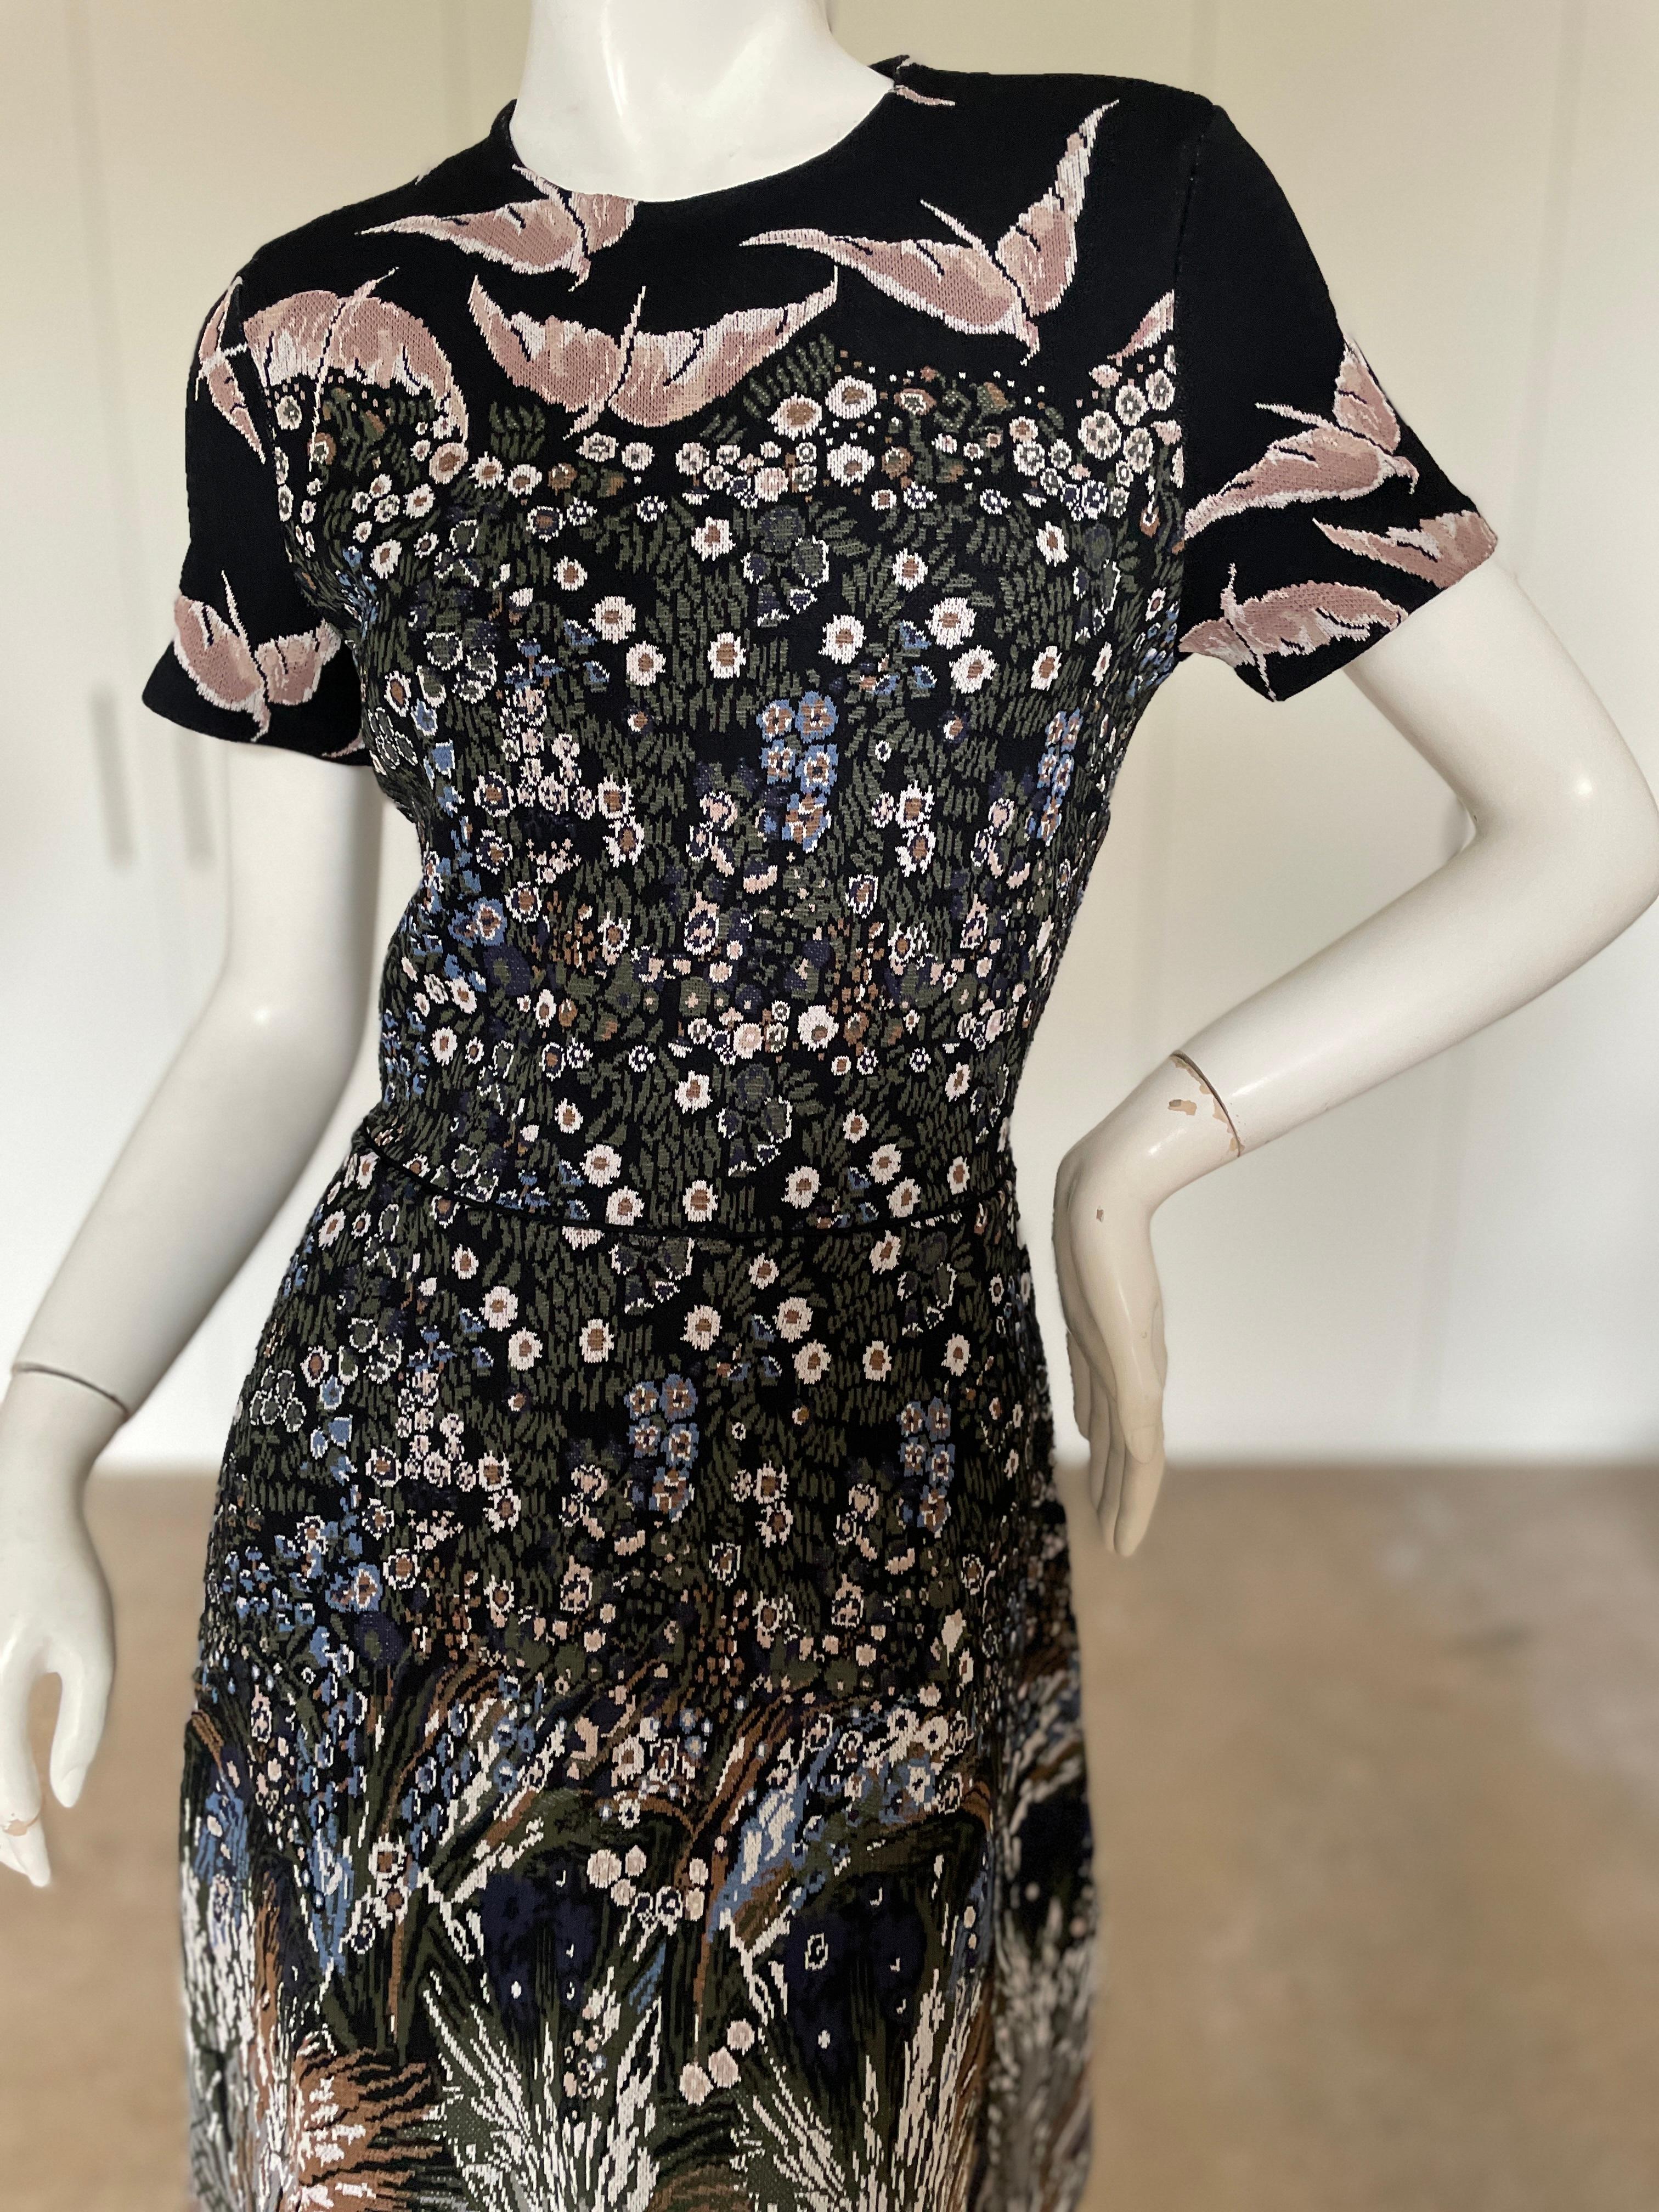 Valentino Inartsia Knit Birds and Flowers Dress.
This is so pretty, but runs  small for it's size, so please refer to measurements.
Size M
Bust 36